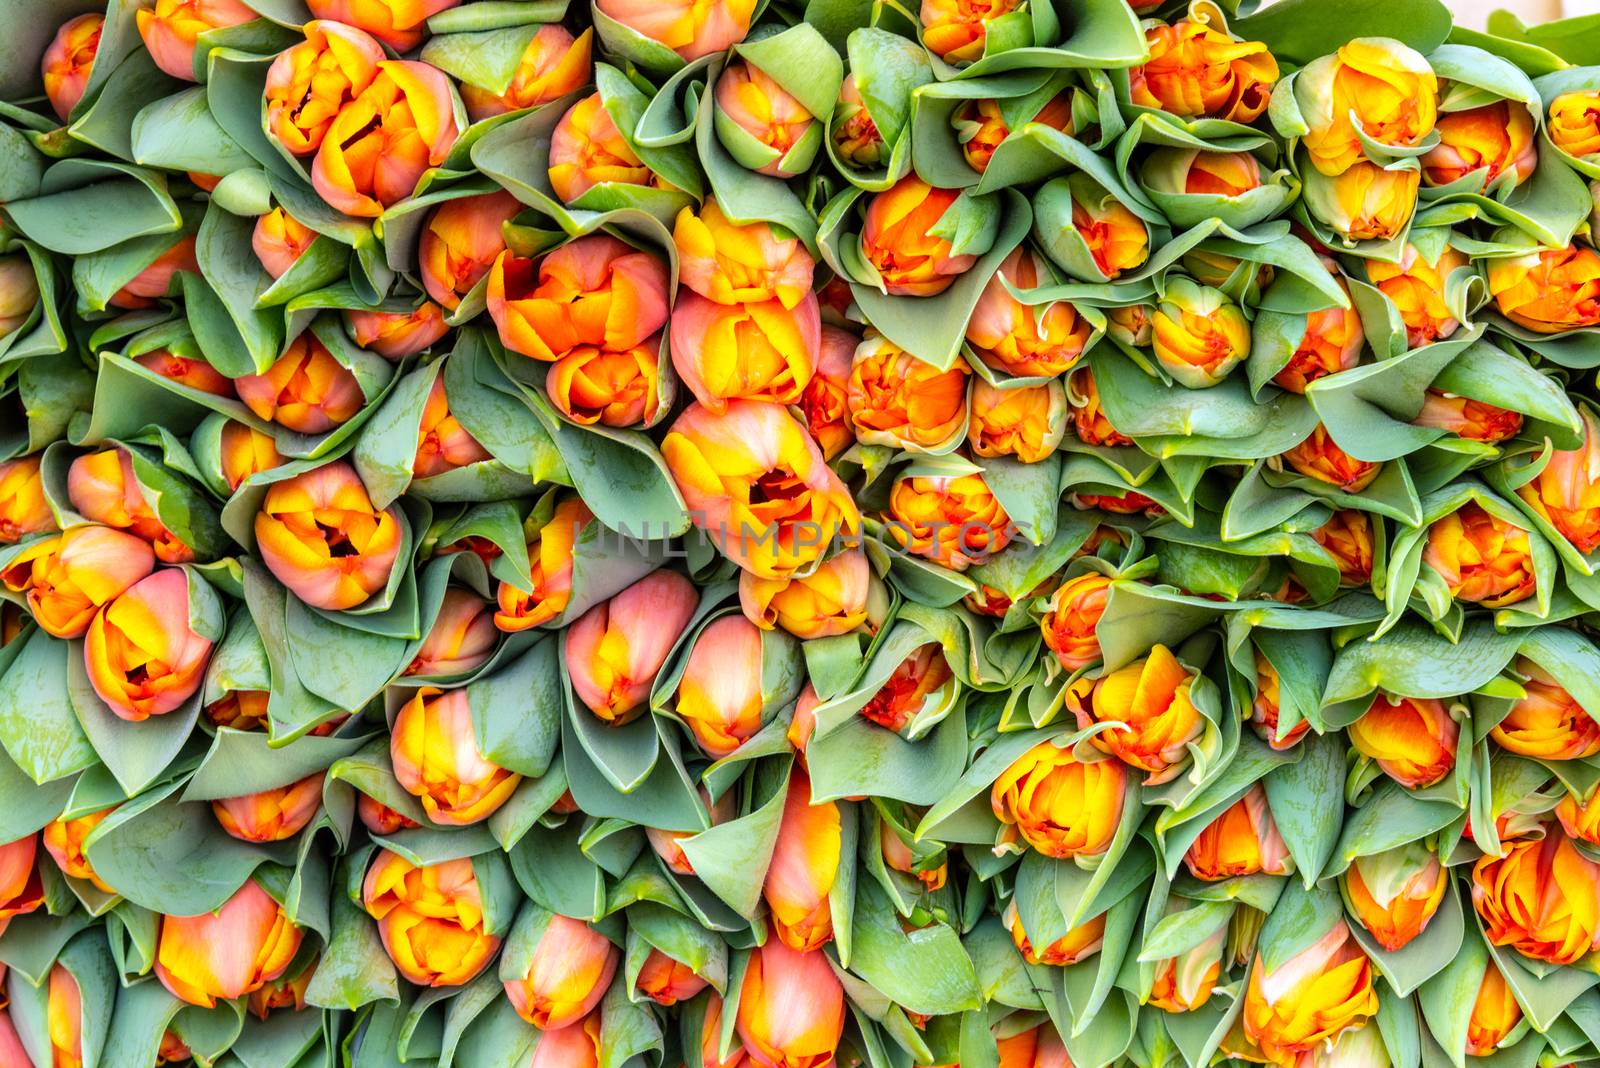 Bouquet of beautiful tulips for sale at a market